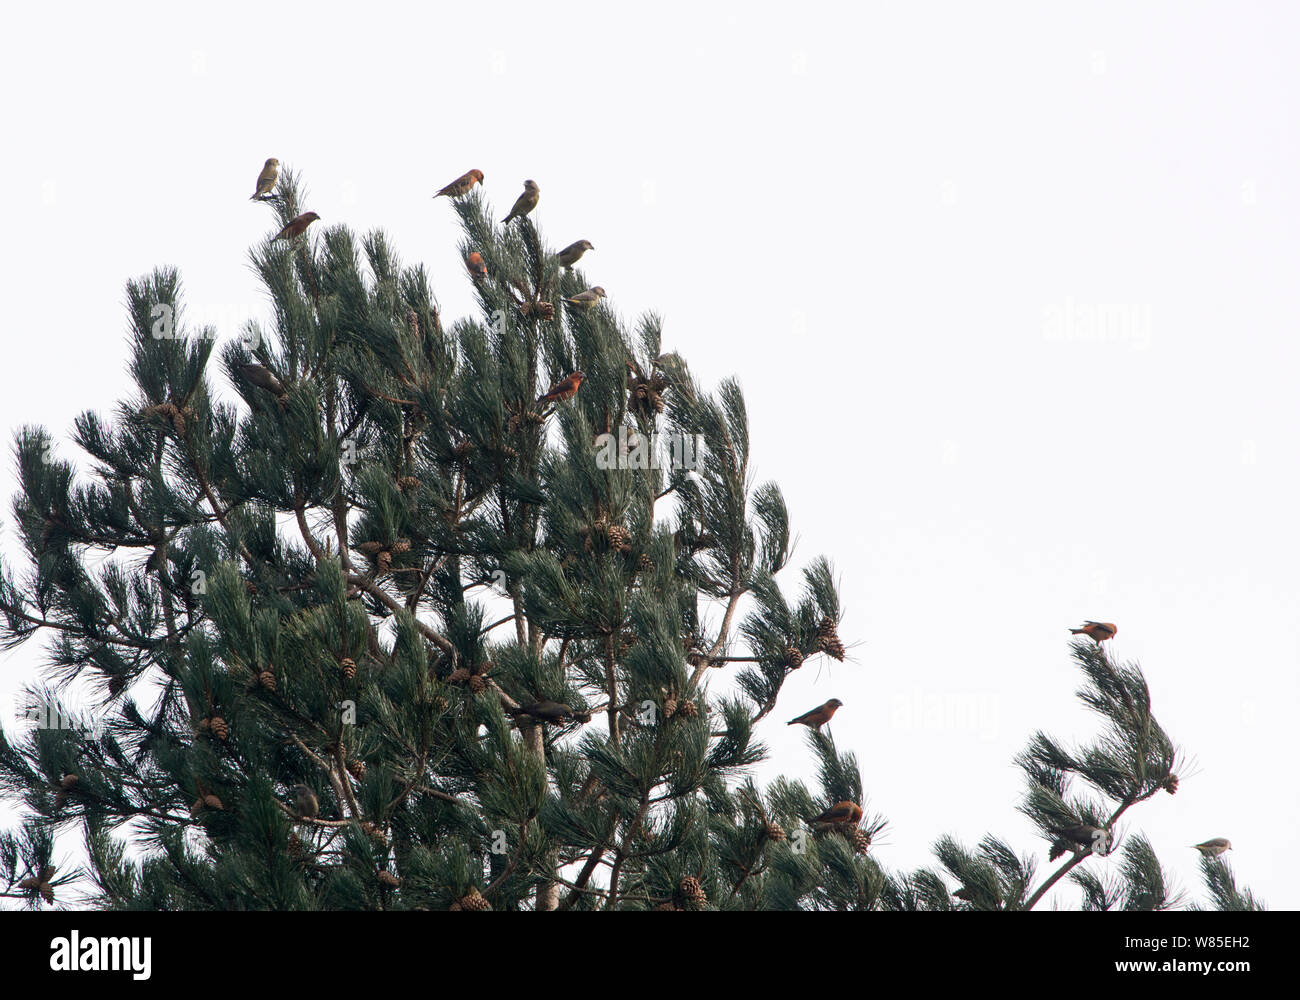 Common Crossbills (Loxia curvirostra) perched in conifer tree, Holt, Norfolk, England, UK. March. Stock Photo